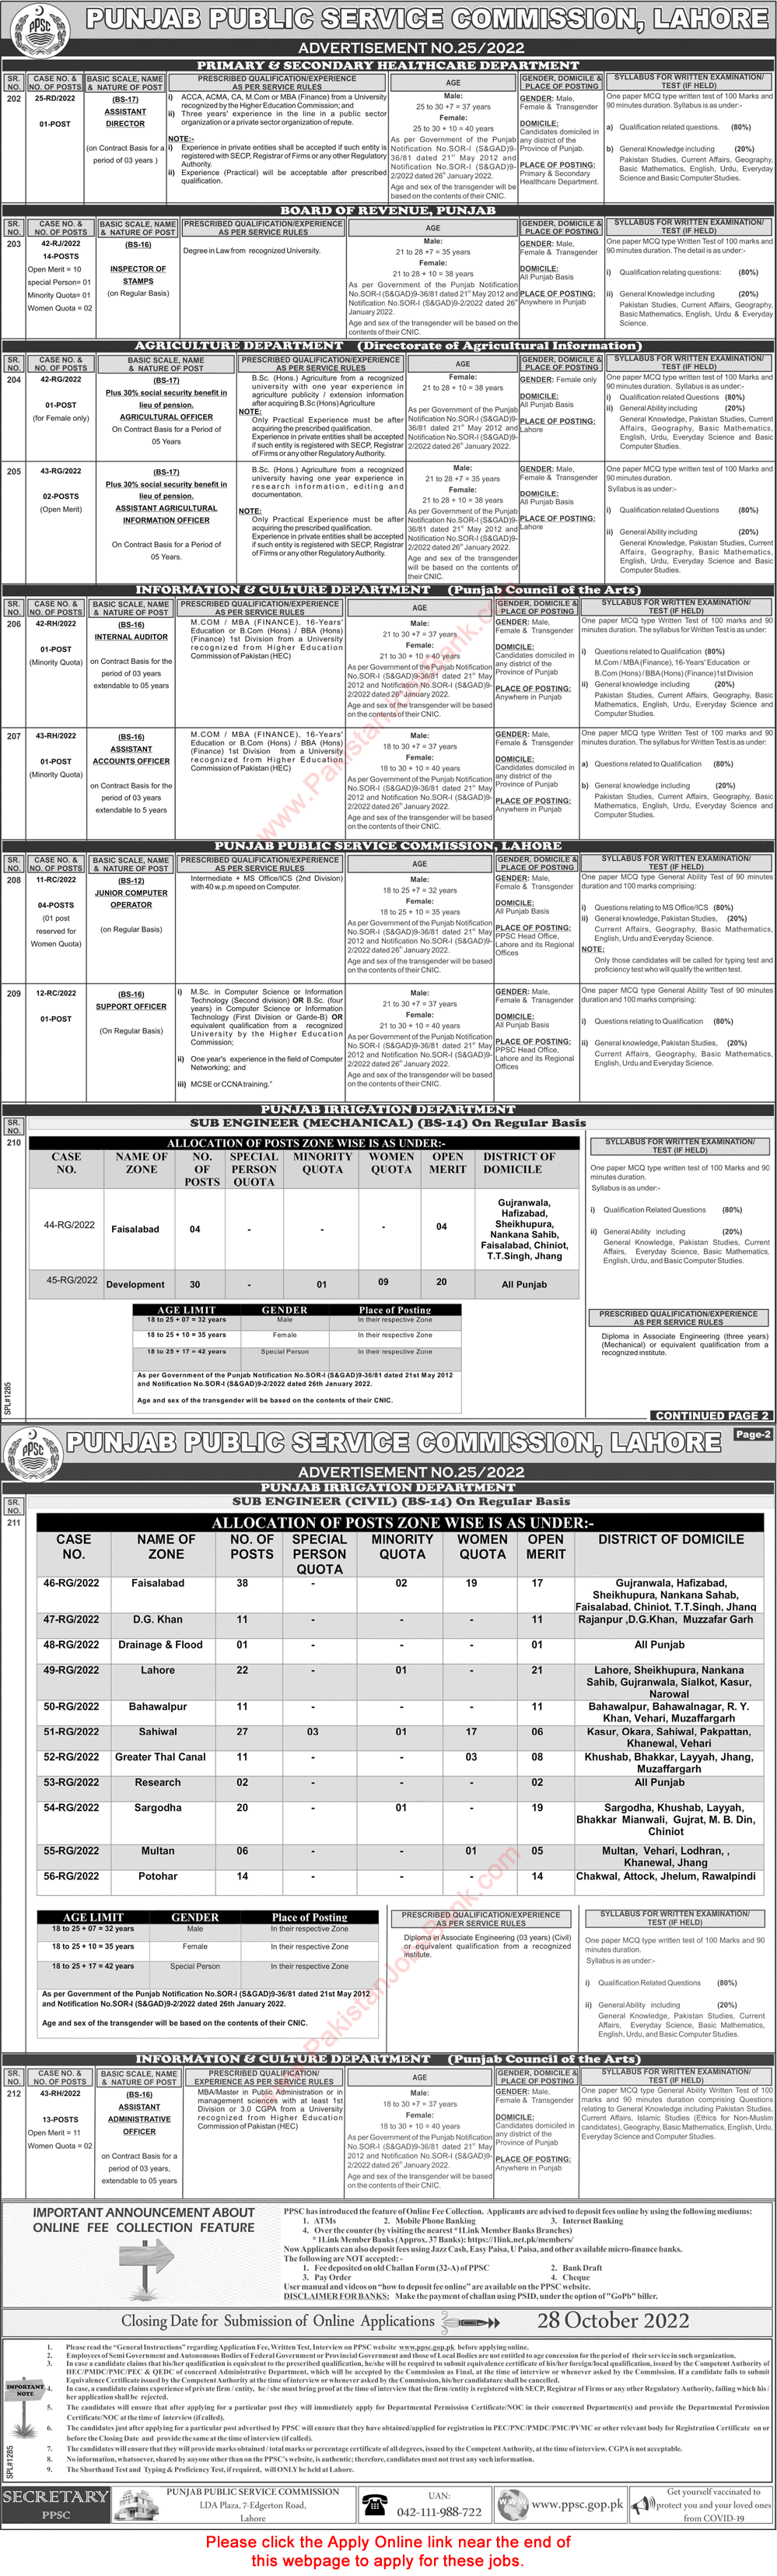 PPSC Jobs October 2022 Apply Online PPSC Consolidated Advertisement No.25/2022 Latest